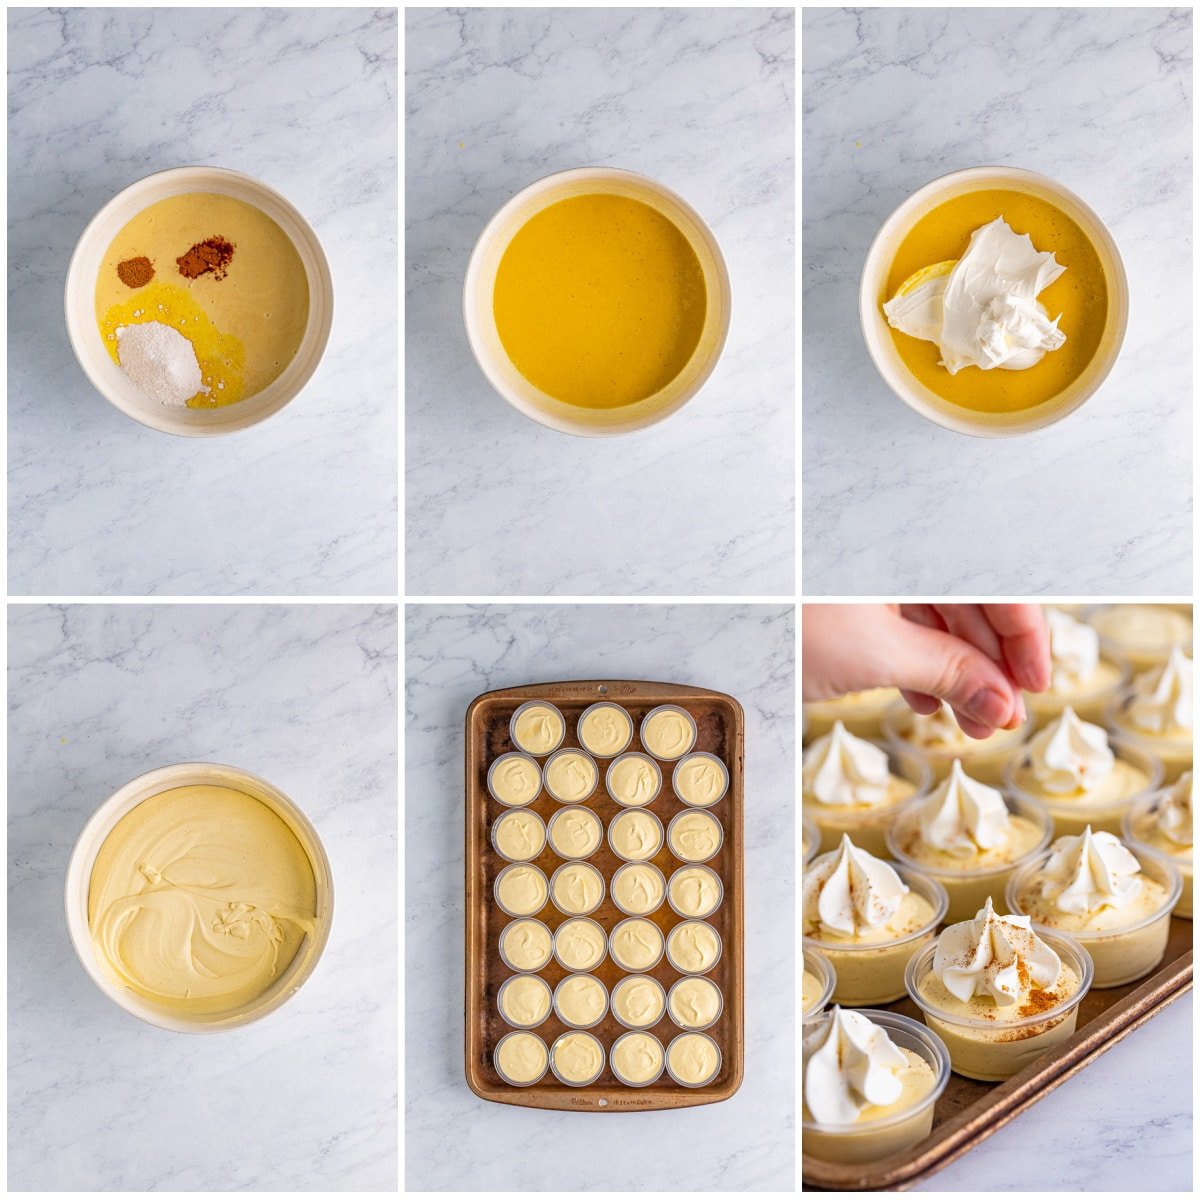 Step by step photos on how to make Eggnog Pudding Shots.